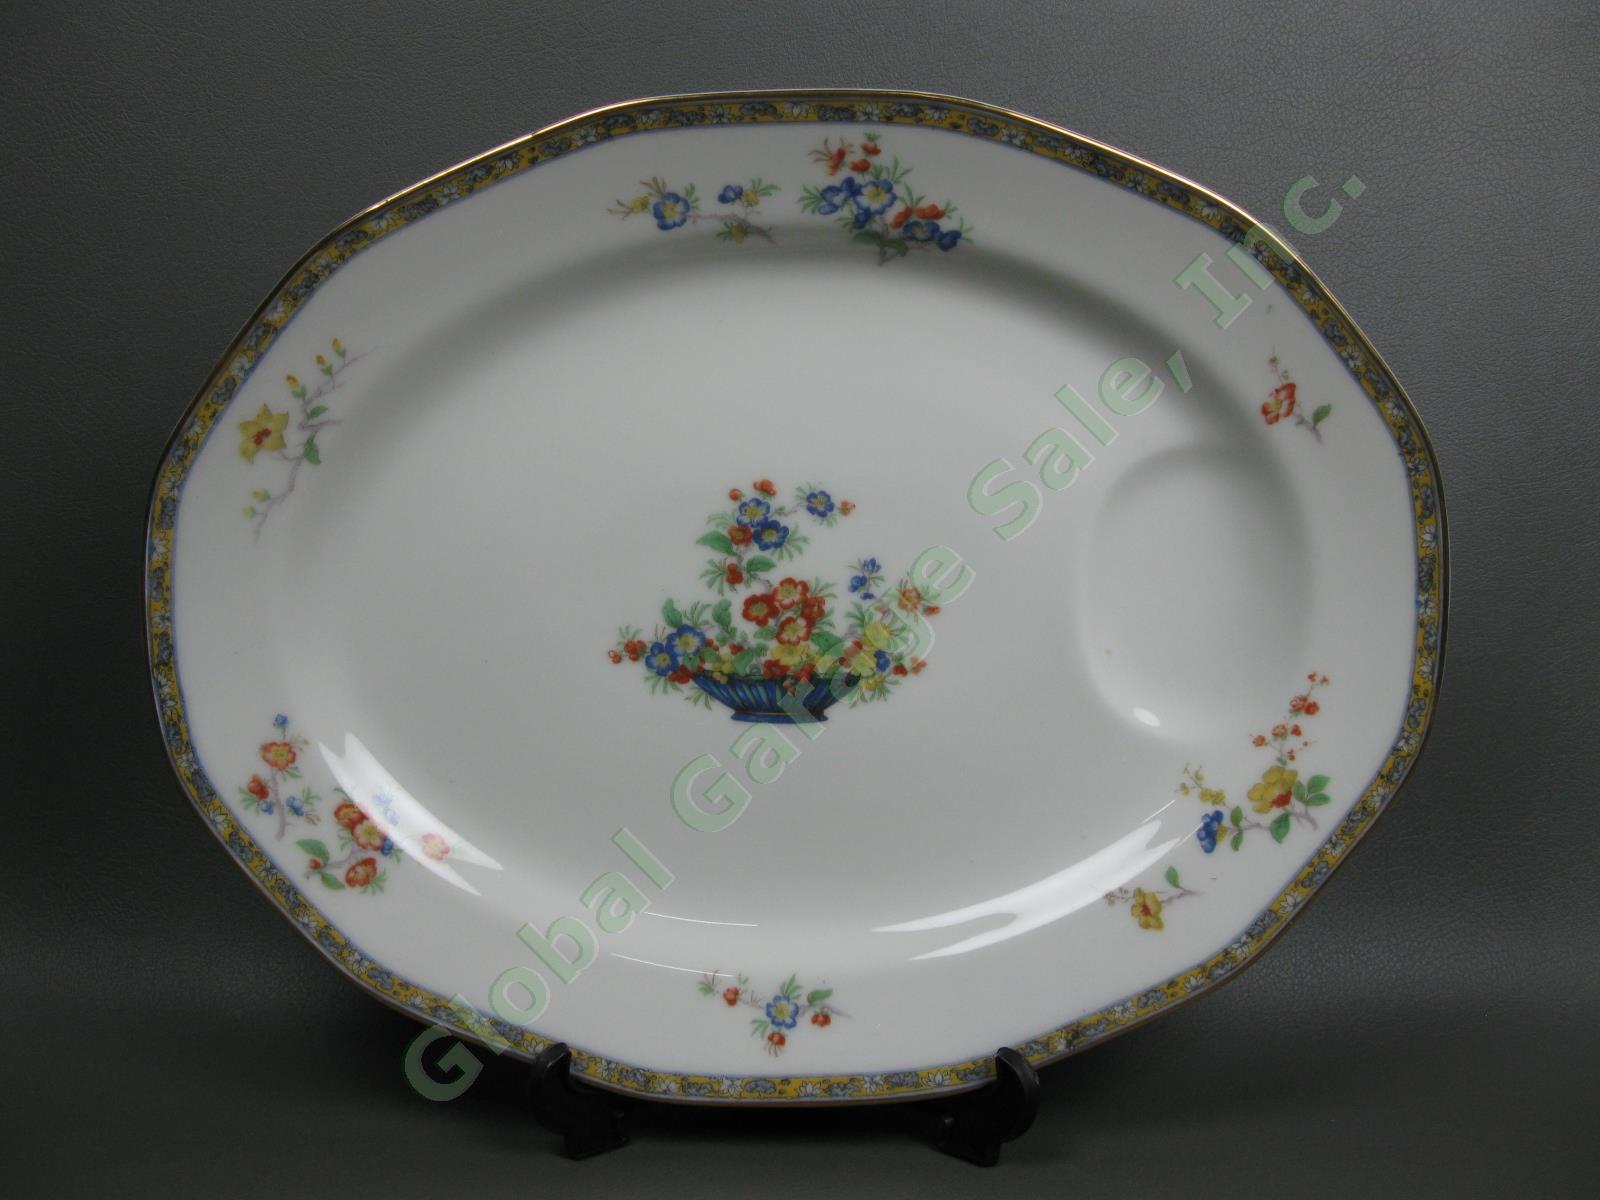 Theodore Haviland Montreux Mongolia 13" Oval Serving Platter Floral Tray Limoges